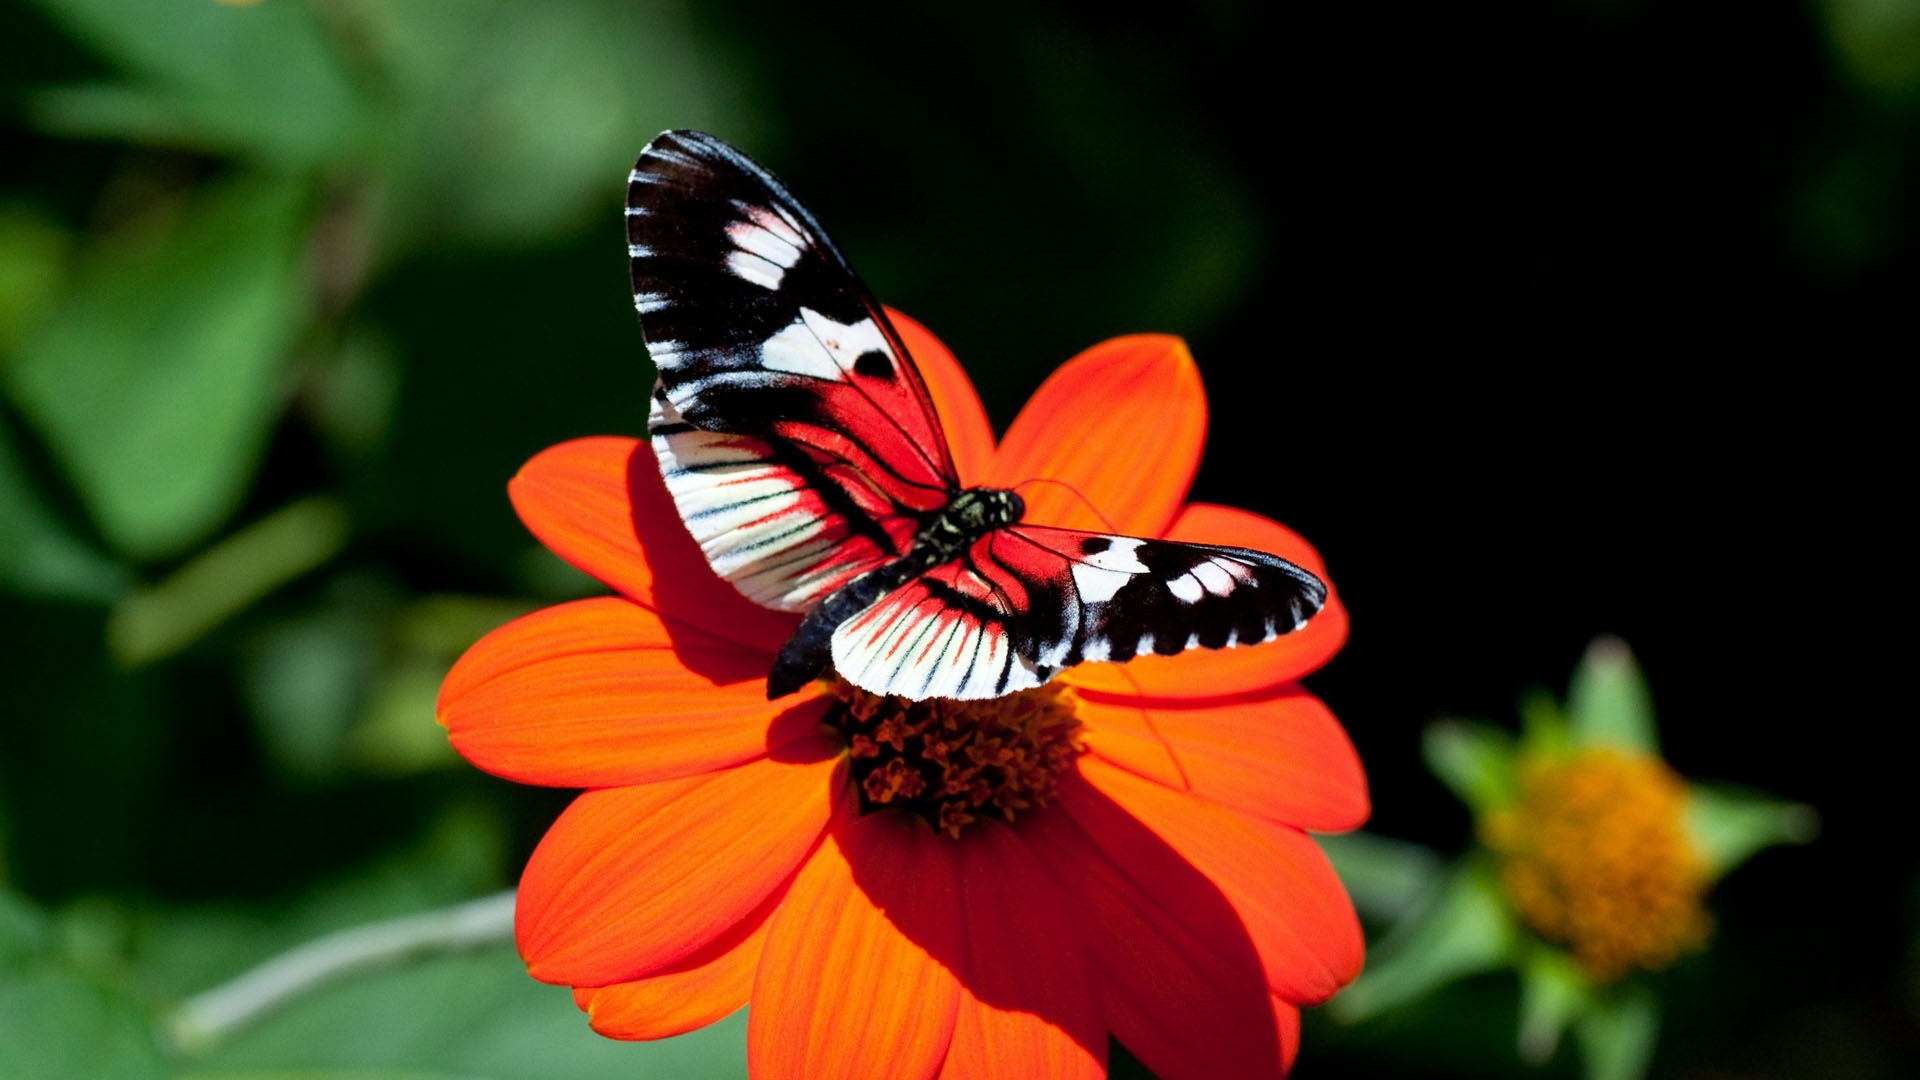 Nice Download 1080p Wallpaper - Real Butterfly Images With Flowers - HD Wallpaper 